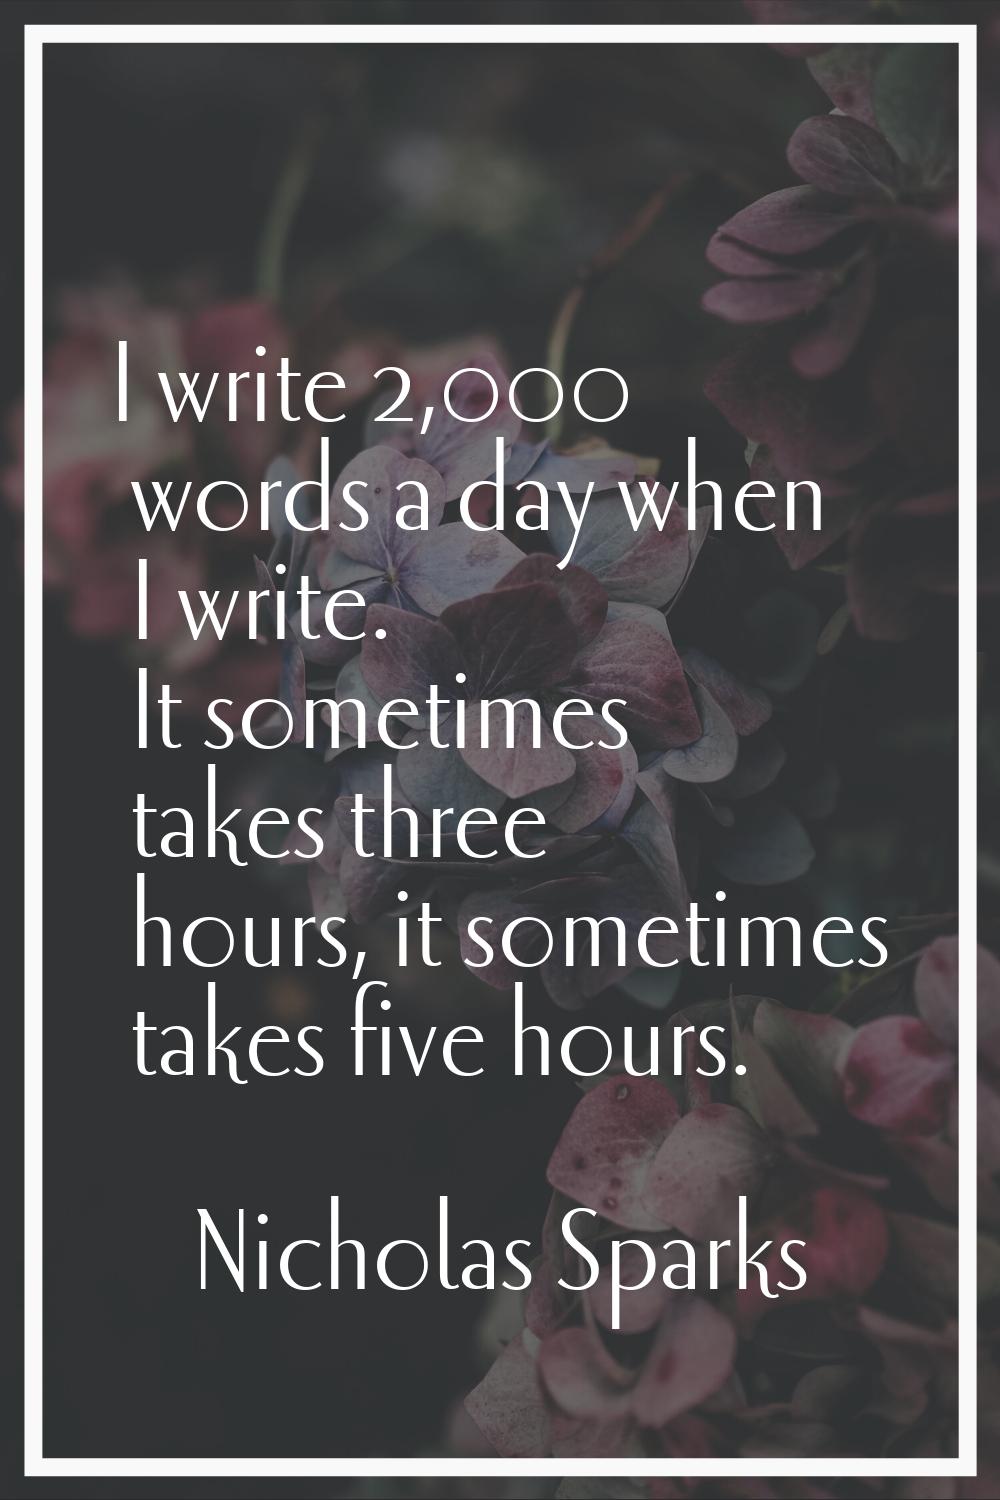 I write 2,000 words a day when I write. It sometimes takes three hours, it sometimes takes five hou